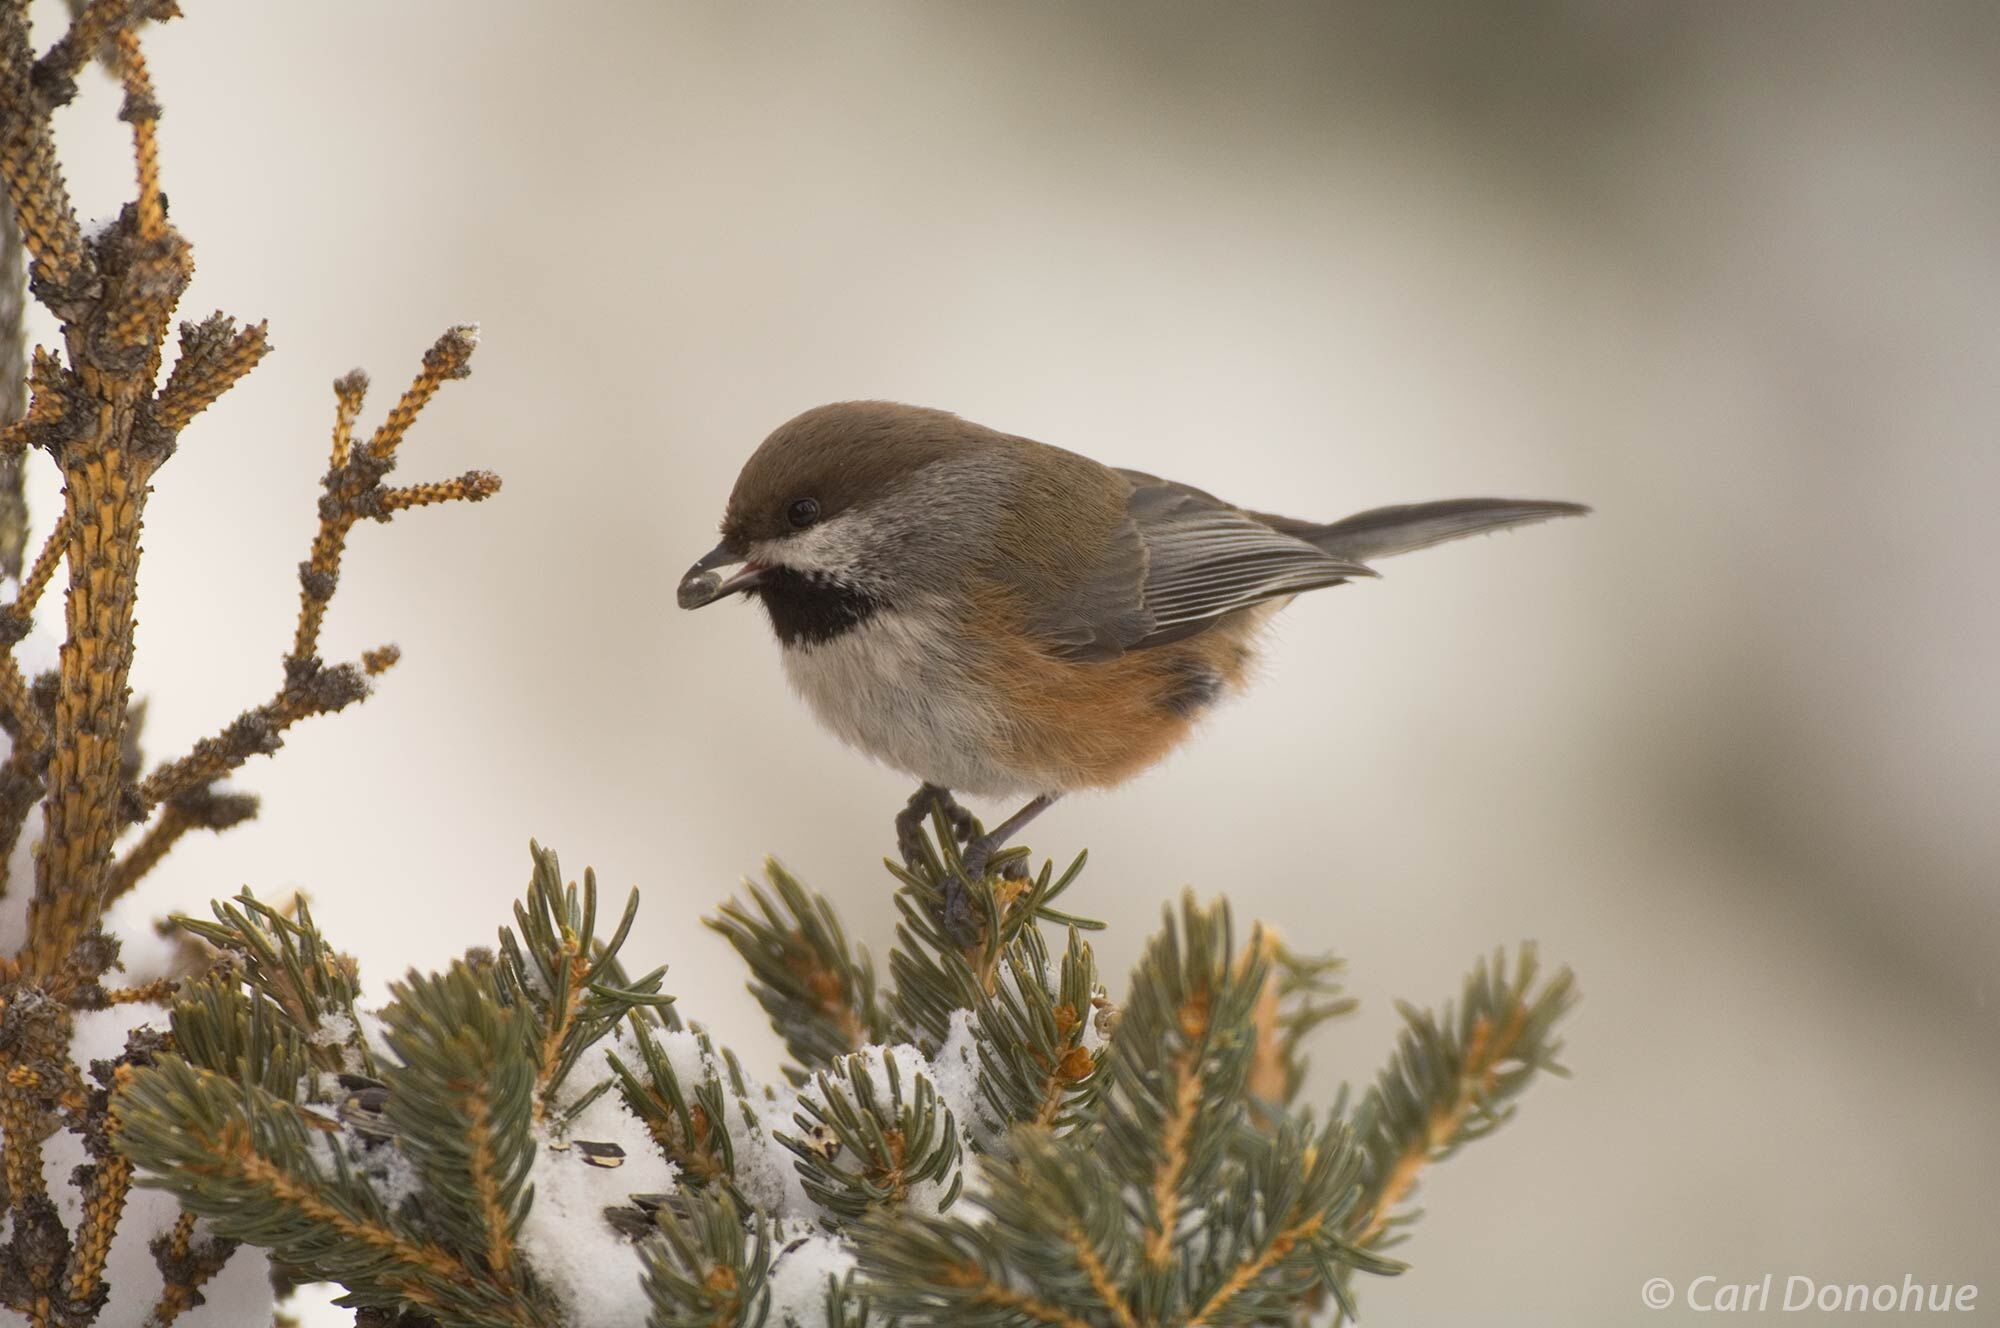 Boreal Chickadee feeding on seeds, perched on white spruce tree, winter. Boreal Chickadees are winter residents, and remain in...